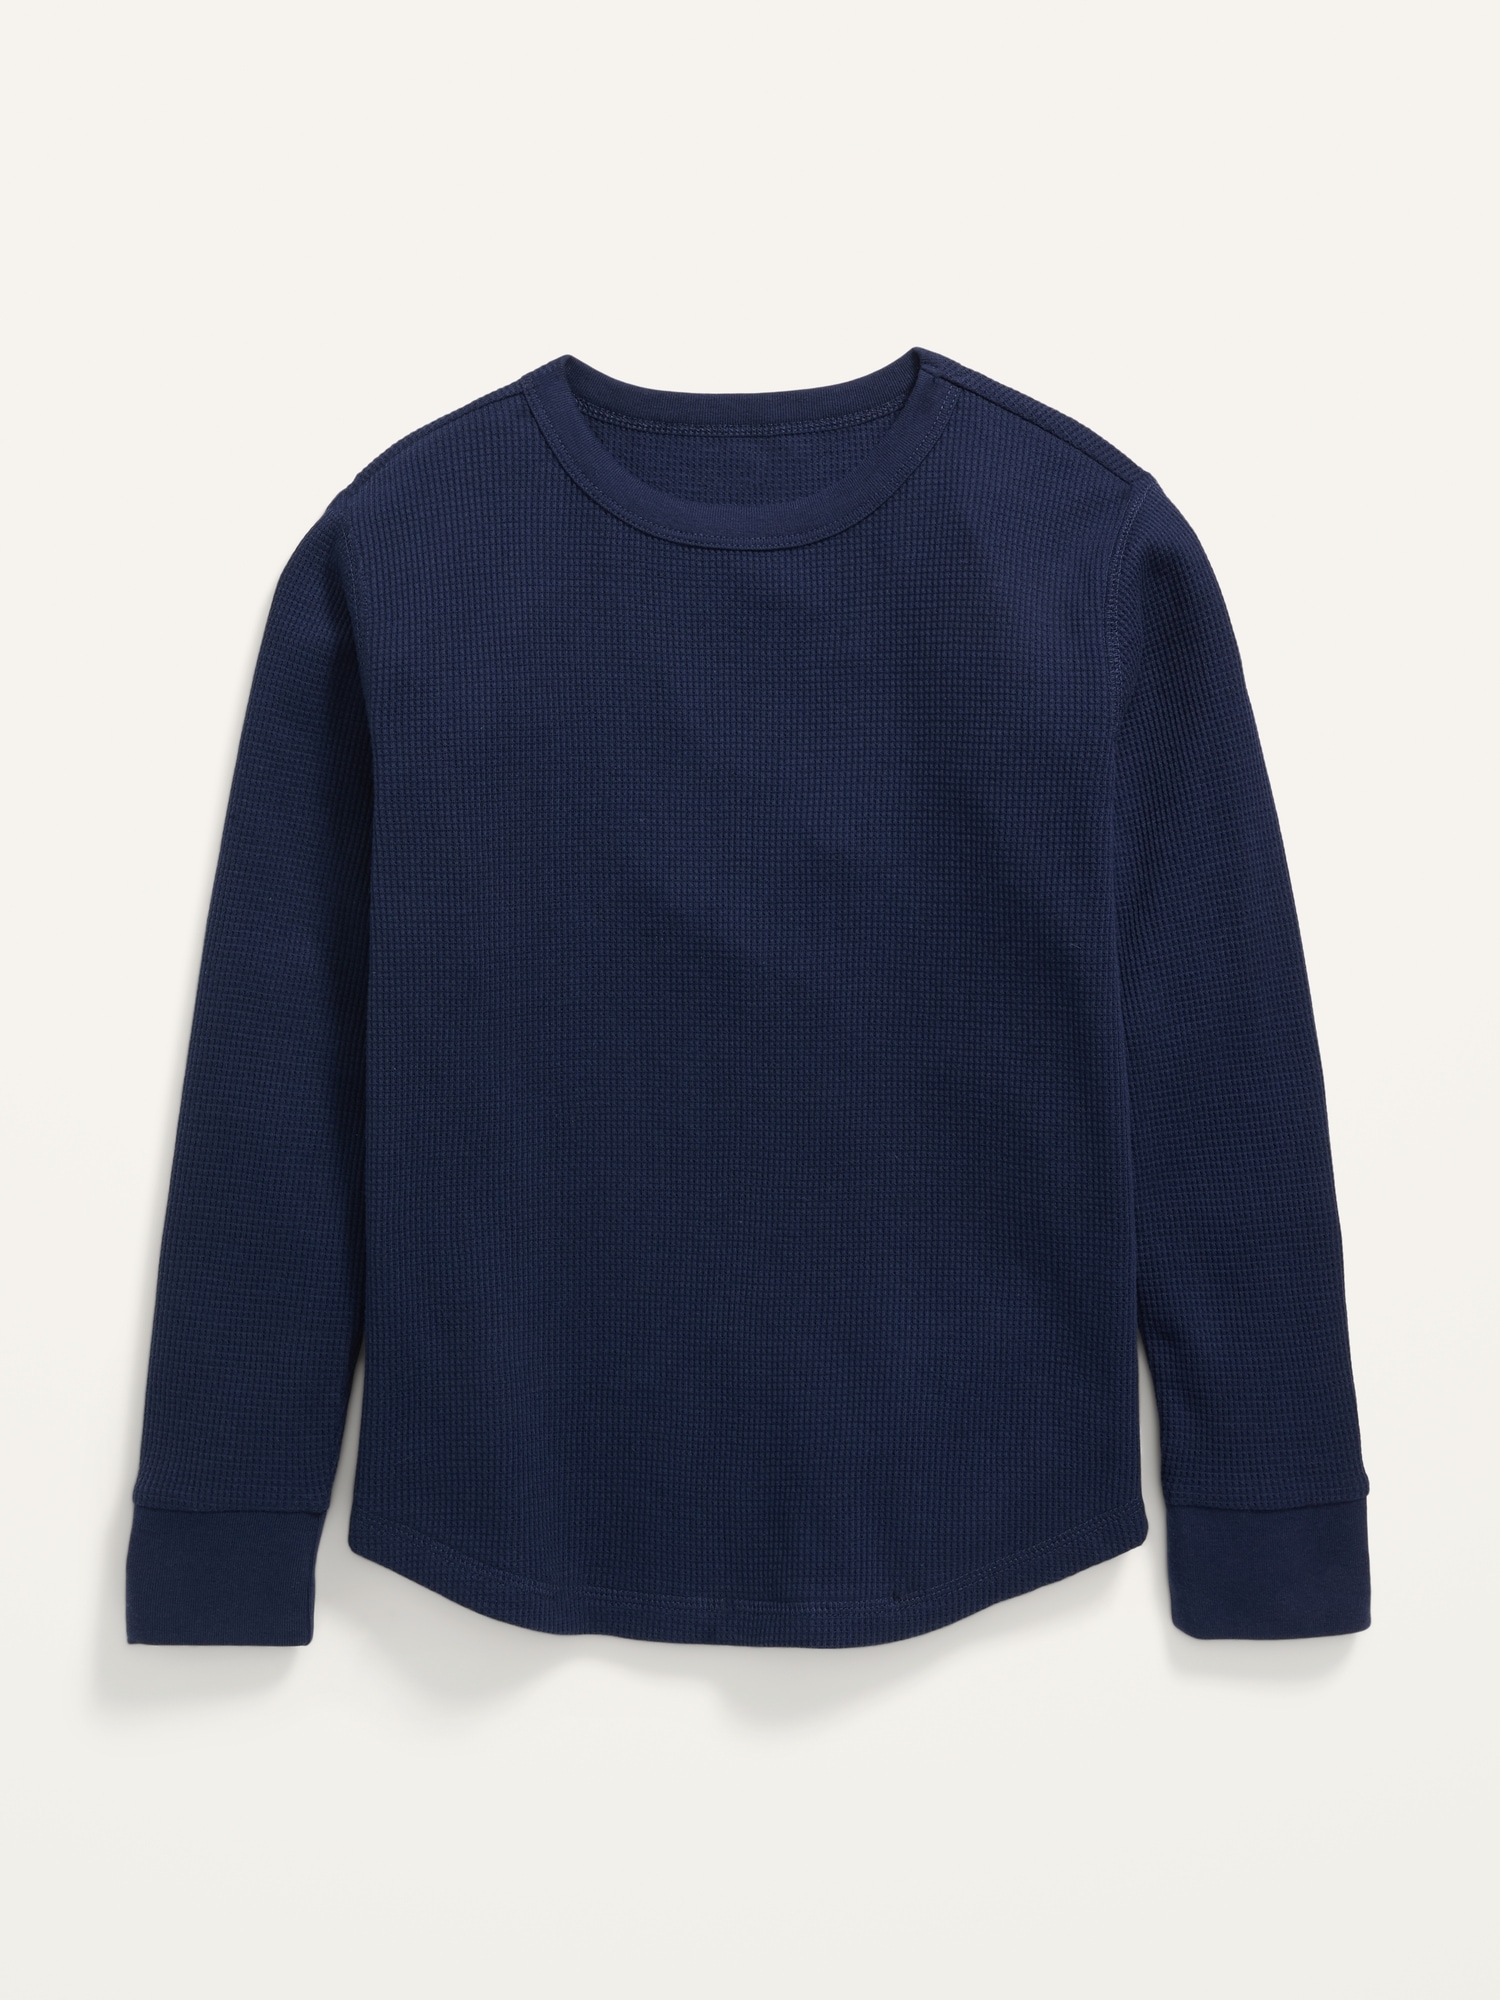 Long-Sleeve Thermal Tee For Boys | Old Navy